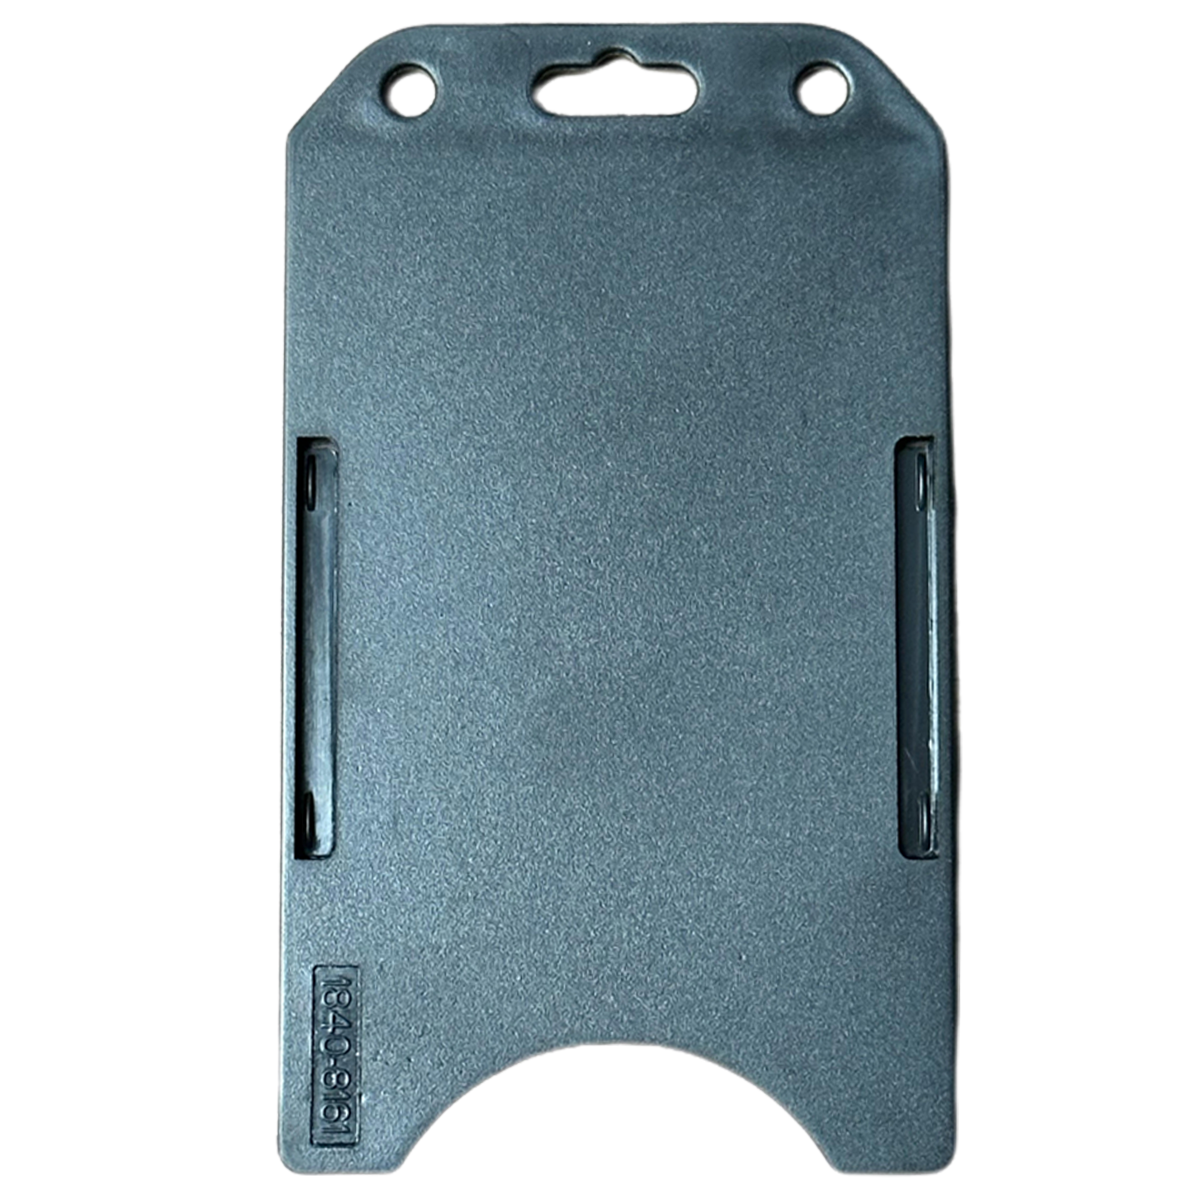 Vertical Open Face Plastic ID Holder (1840-816X)